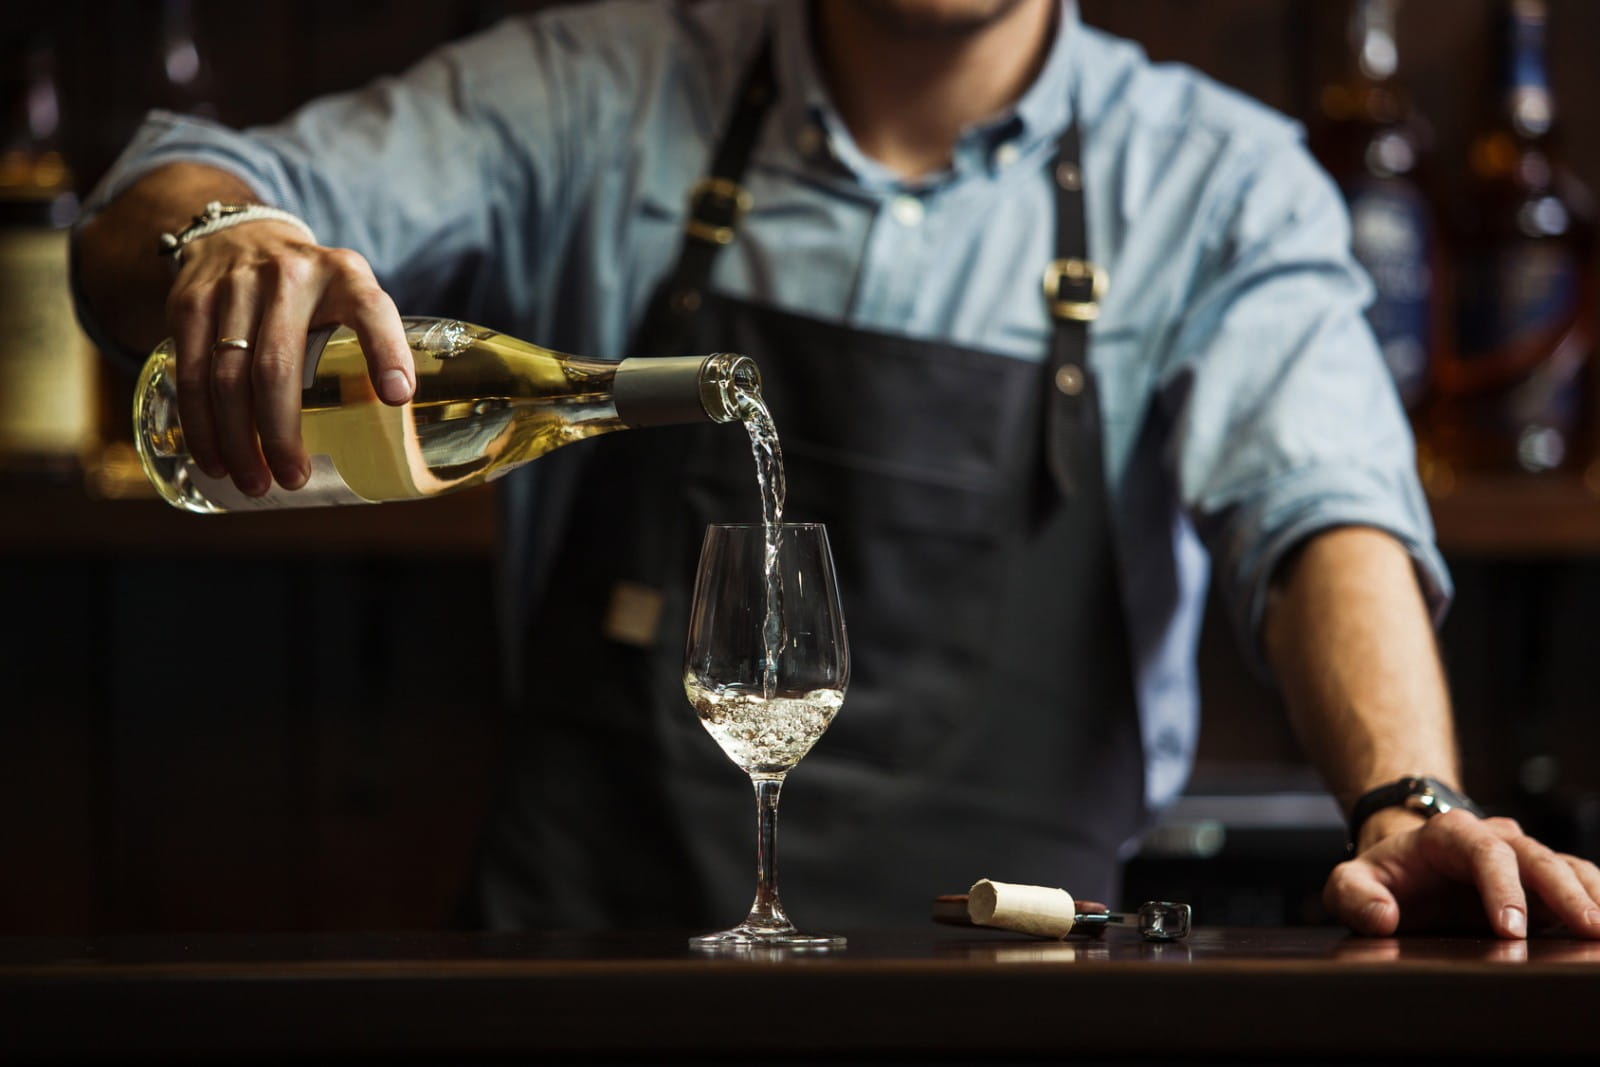 How to pick a good wine from a wine list